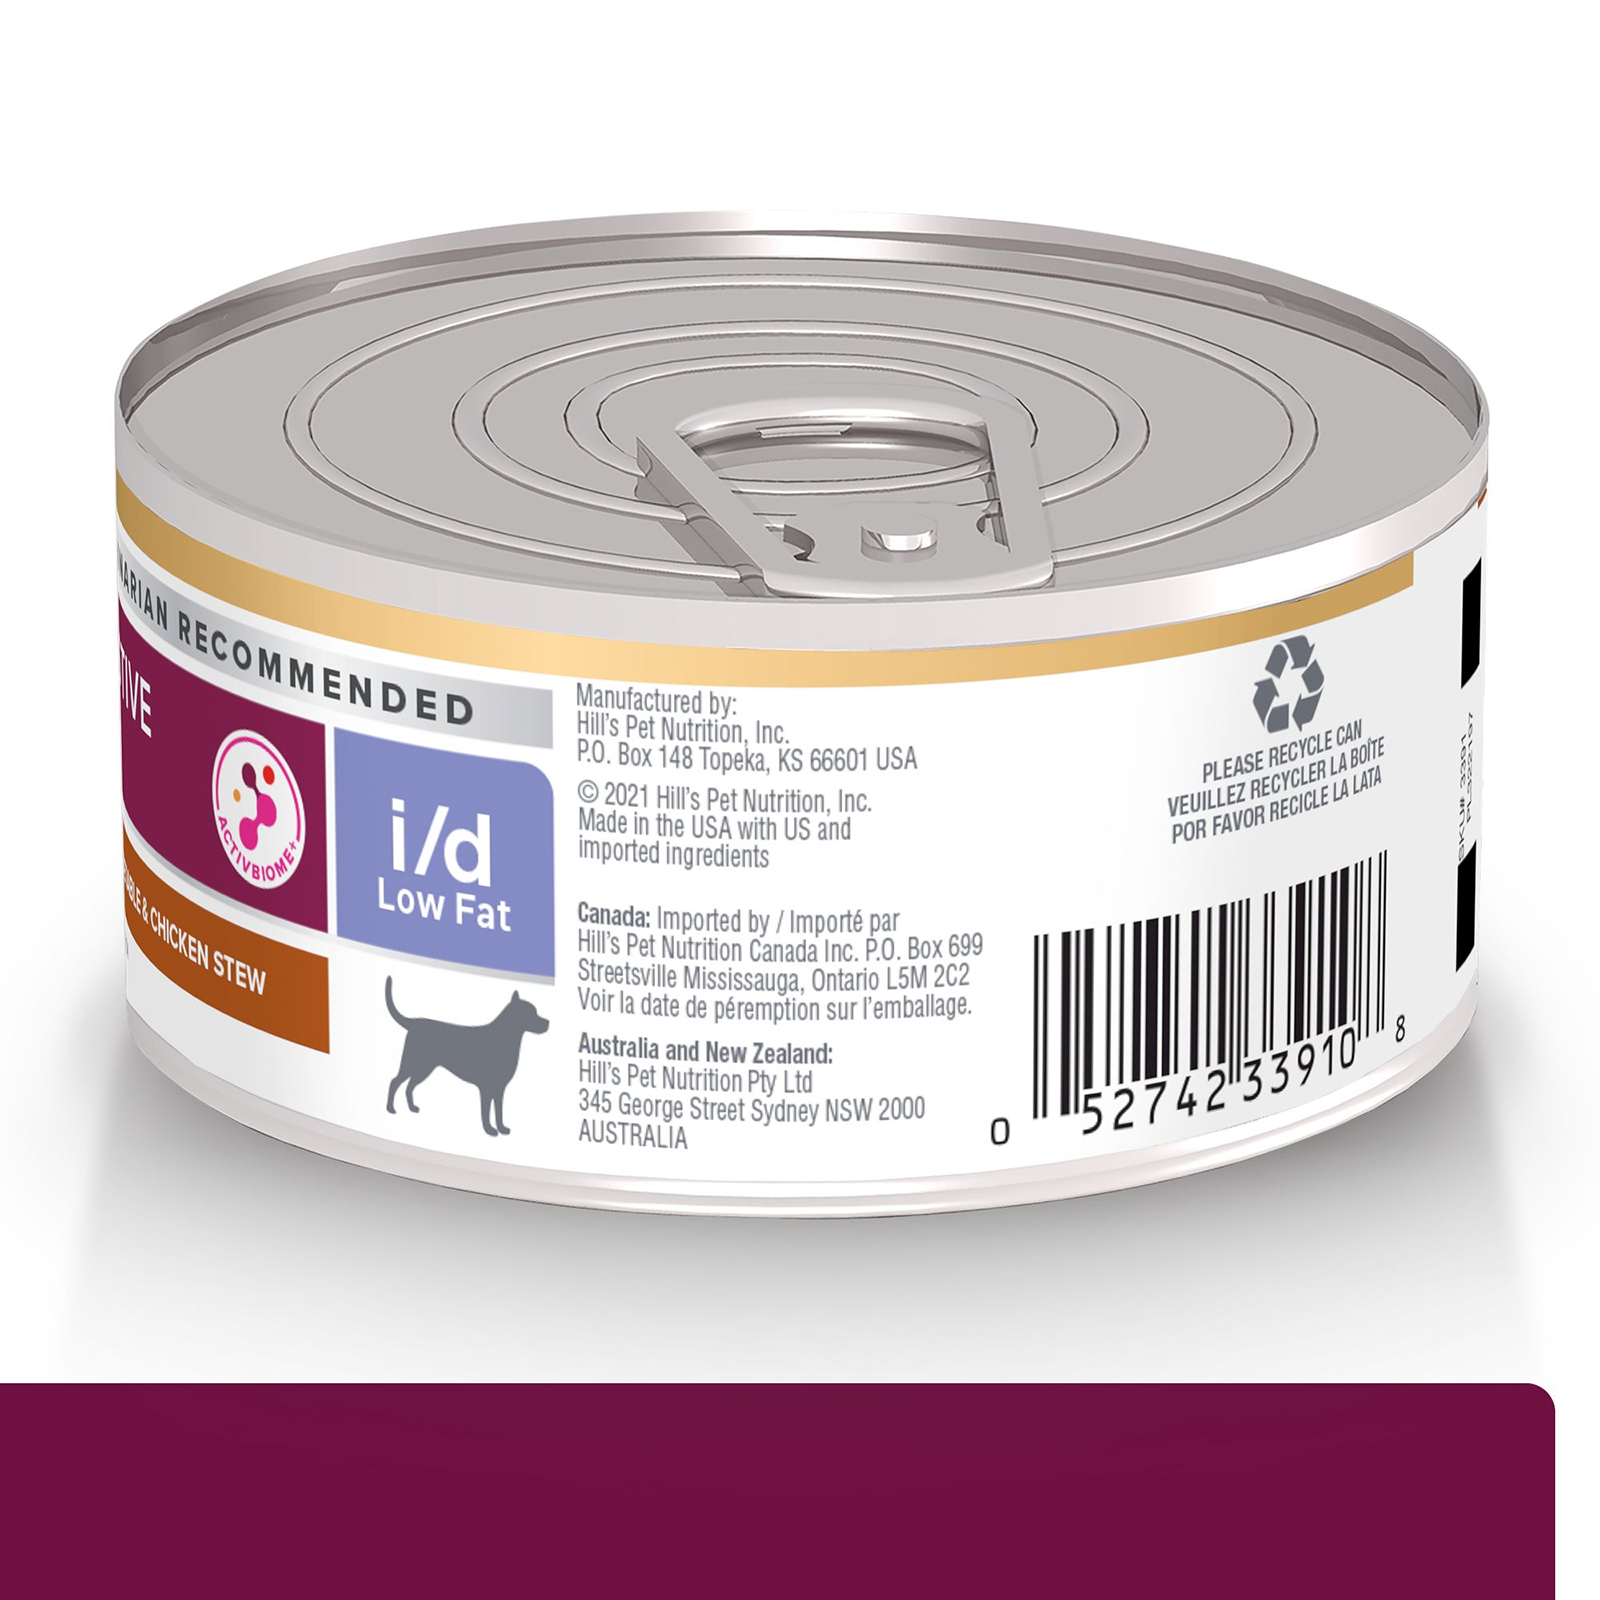 Hill's Prescription Diet Dog Food Can i/d Low Fat Digestive Care Chicken & Vegetable Stew